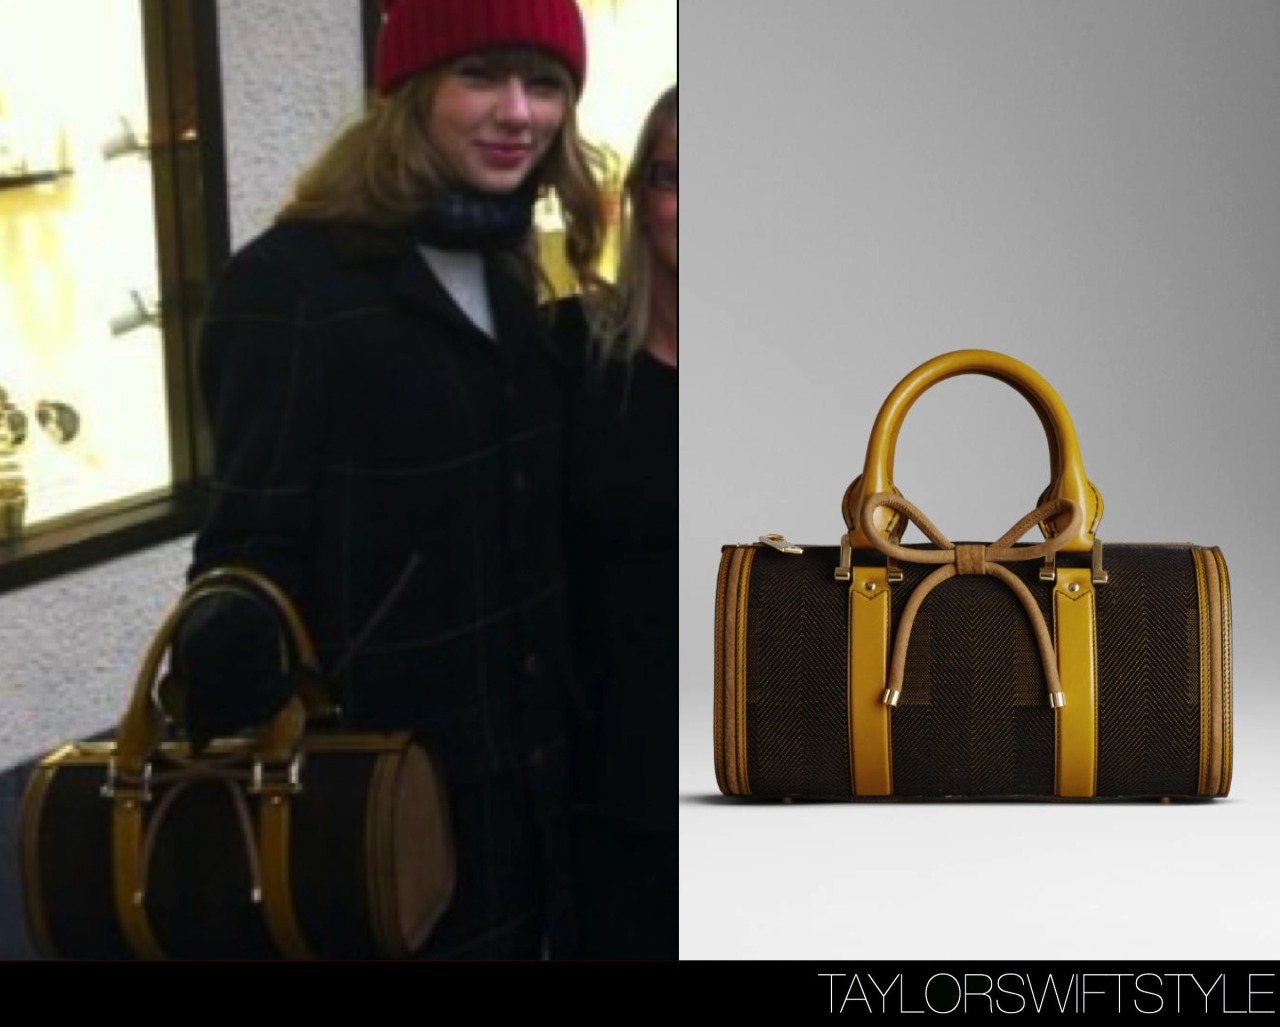 Taylor Swift with The Bridle Bag, from the new Burberry collection